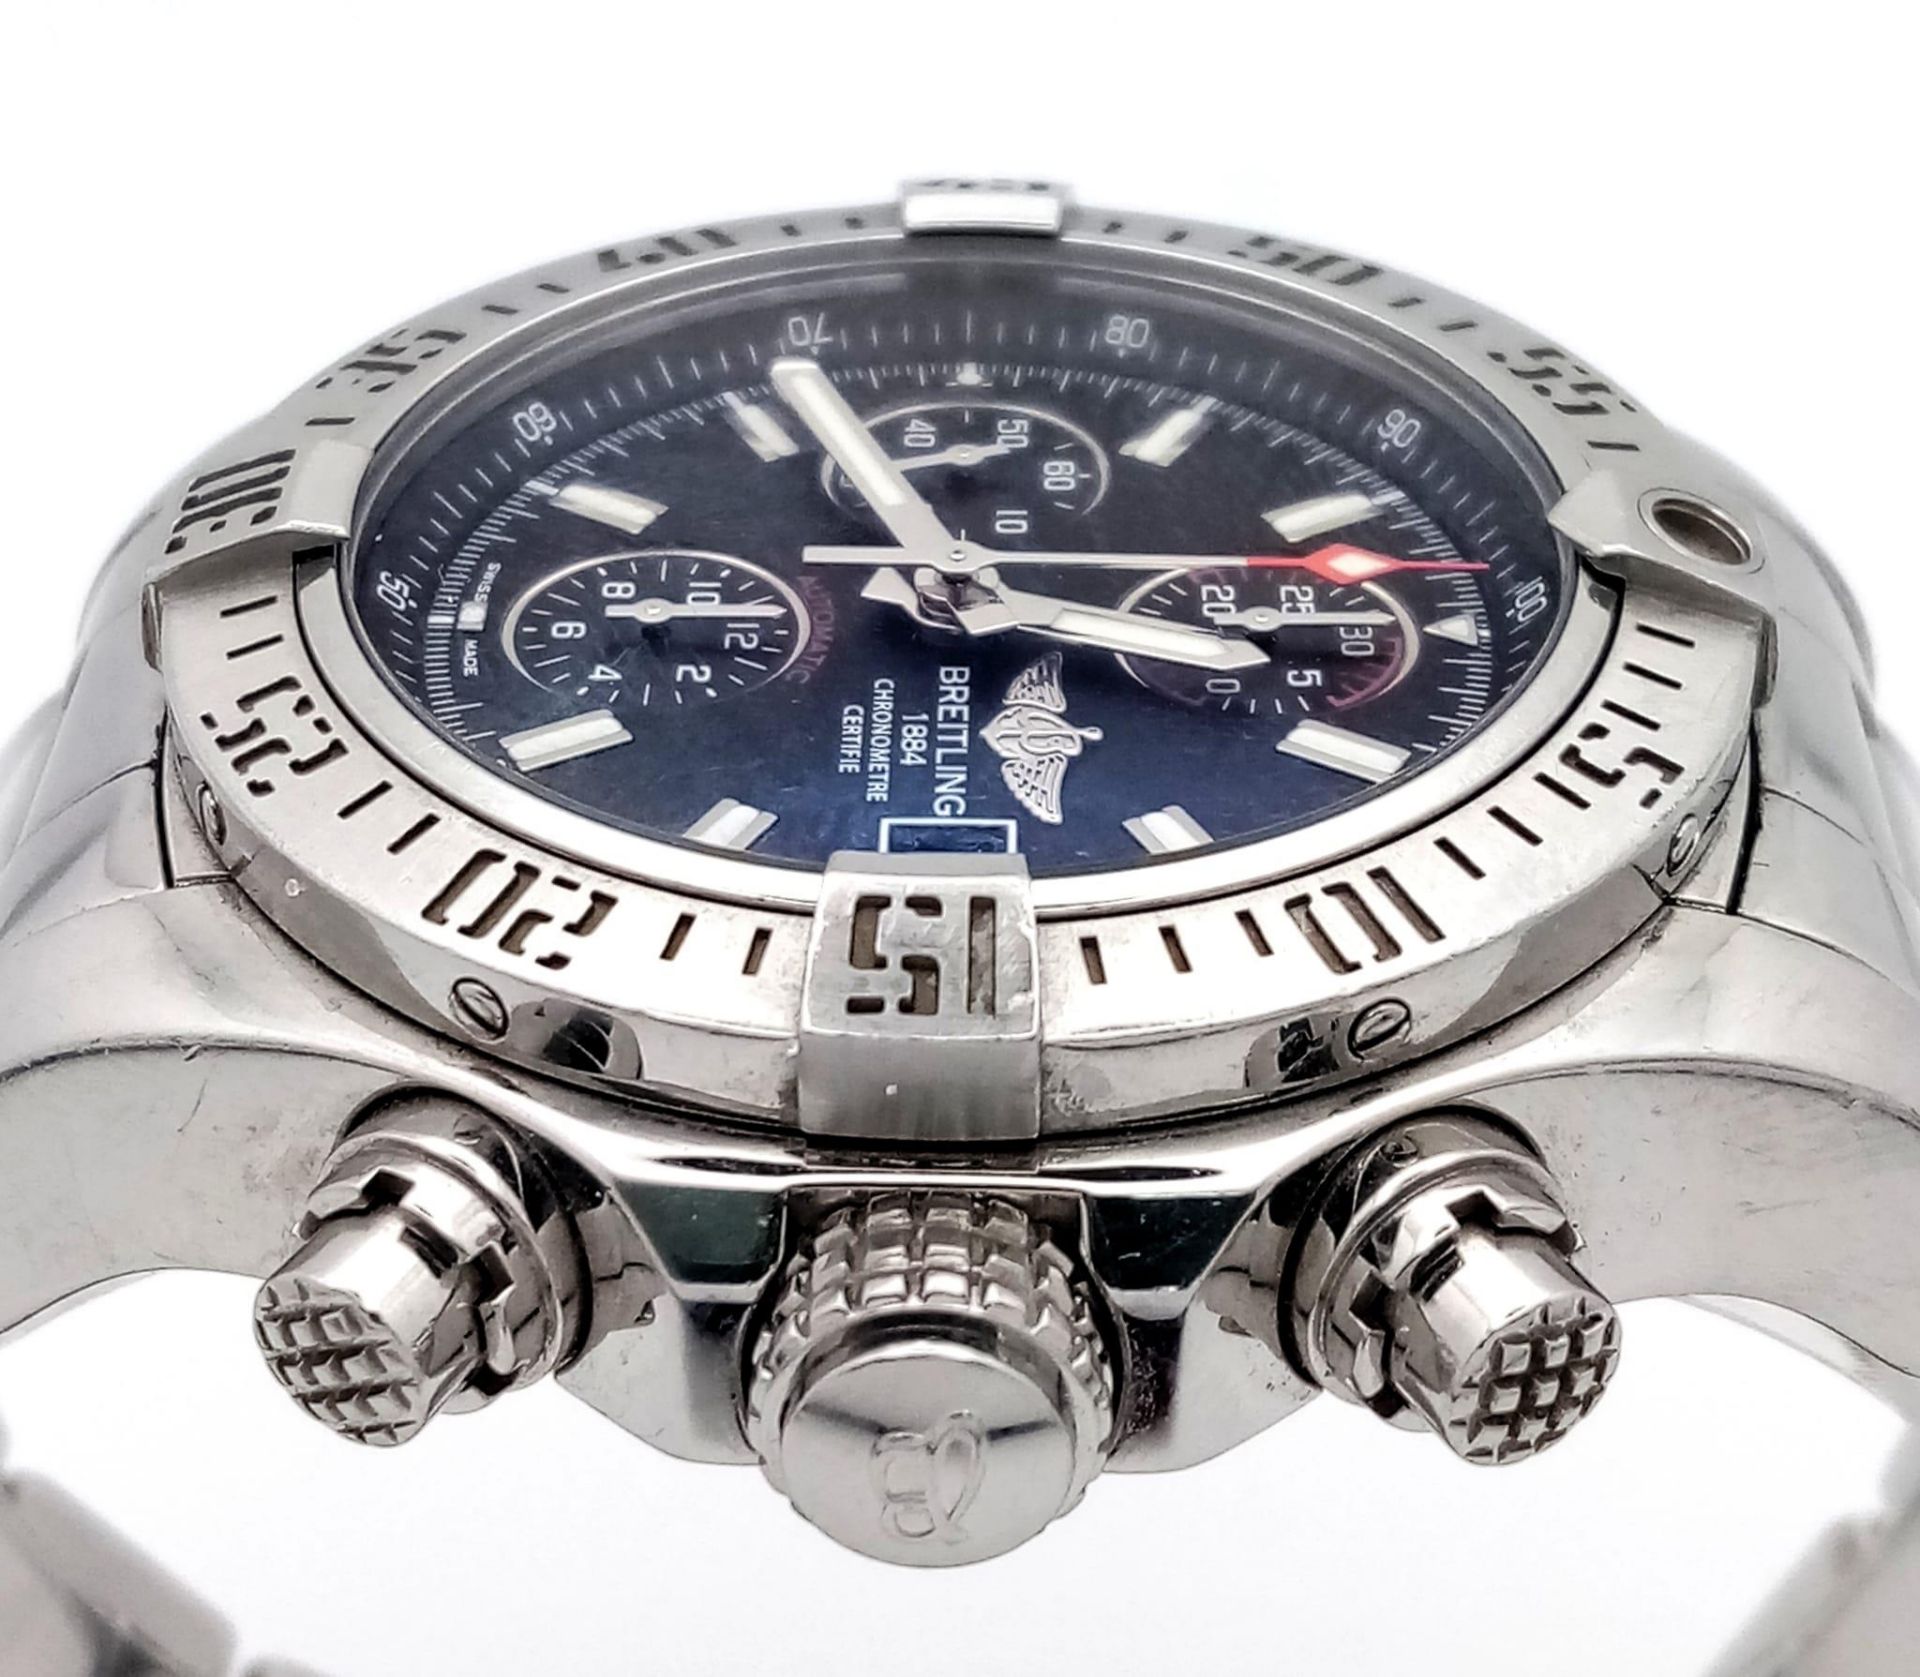 A Breitling Avenger II Chronograph Gents Watch. Stainless steel bracelet and case - 43mm. Black dial - Bild 4 aus 11